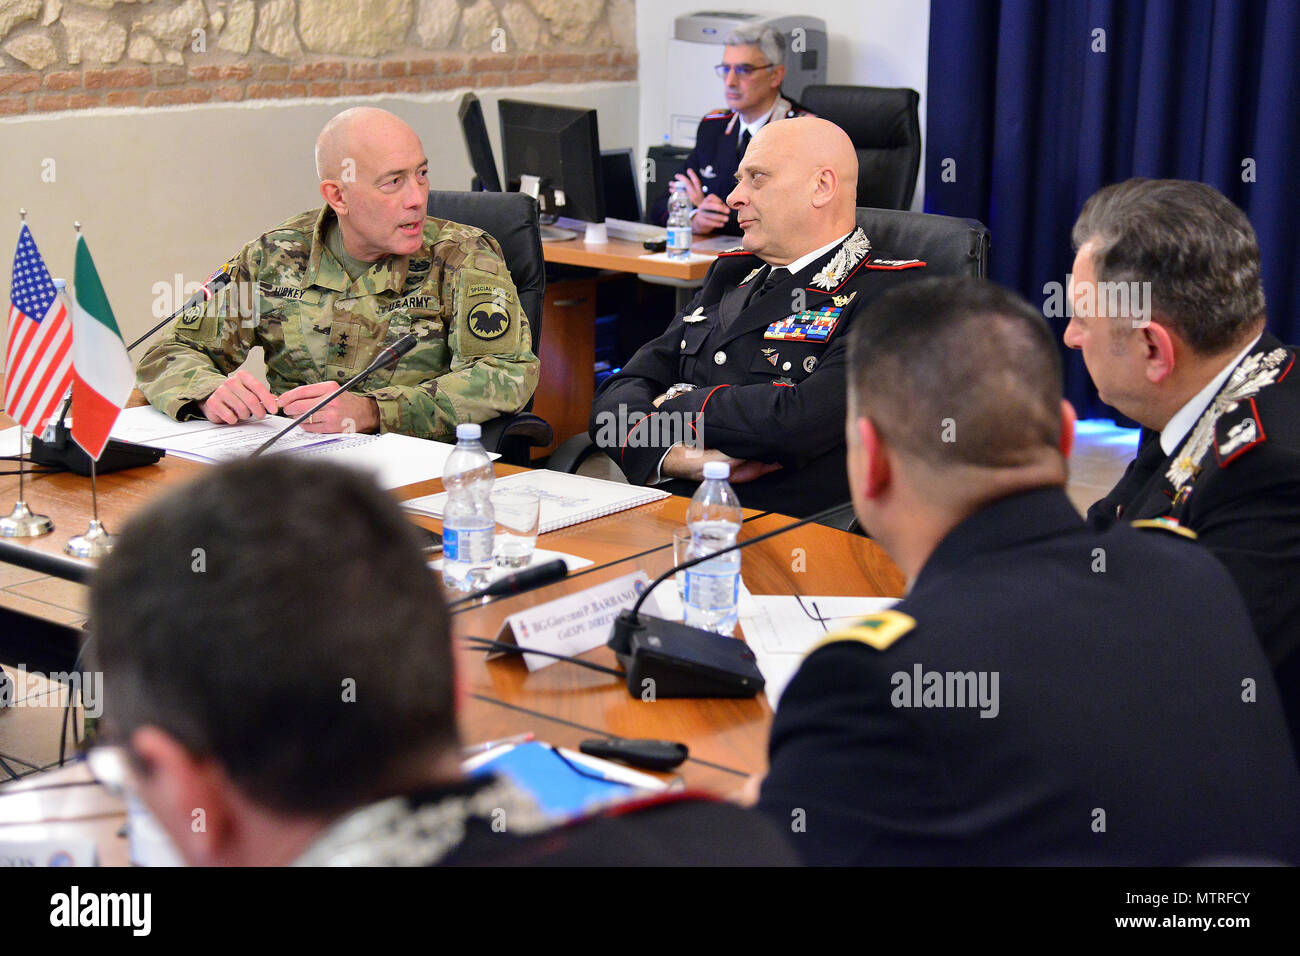 Lt. Gen. Charles D. Luckey (left), Commanding General U.S. Army Reserve Command, talk with Lt. Gen Vincenzo Coppola (right), Commanding General “Palidoro” Carabinieri Specialized and Mobile Units, during visit at Center of Excellence for Stability Police Units (CoESPU) Vicenza, Italy, January 20, 2017.(U.S. Army Photo by Visual Information Specialist Paolo Bovo/released) Stock Photo